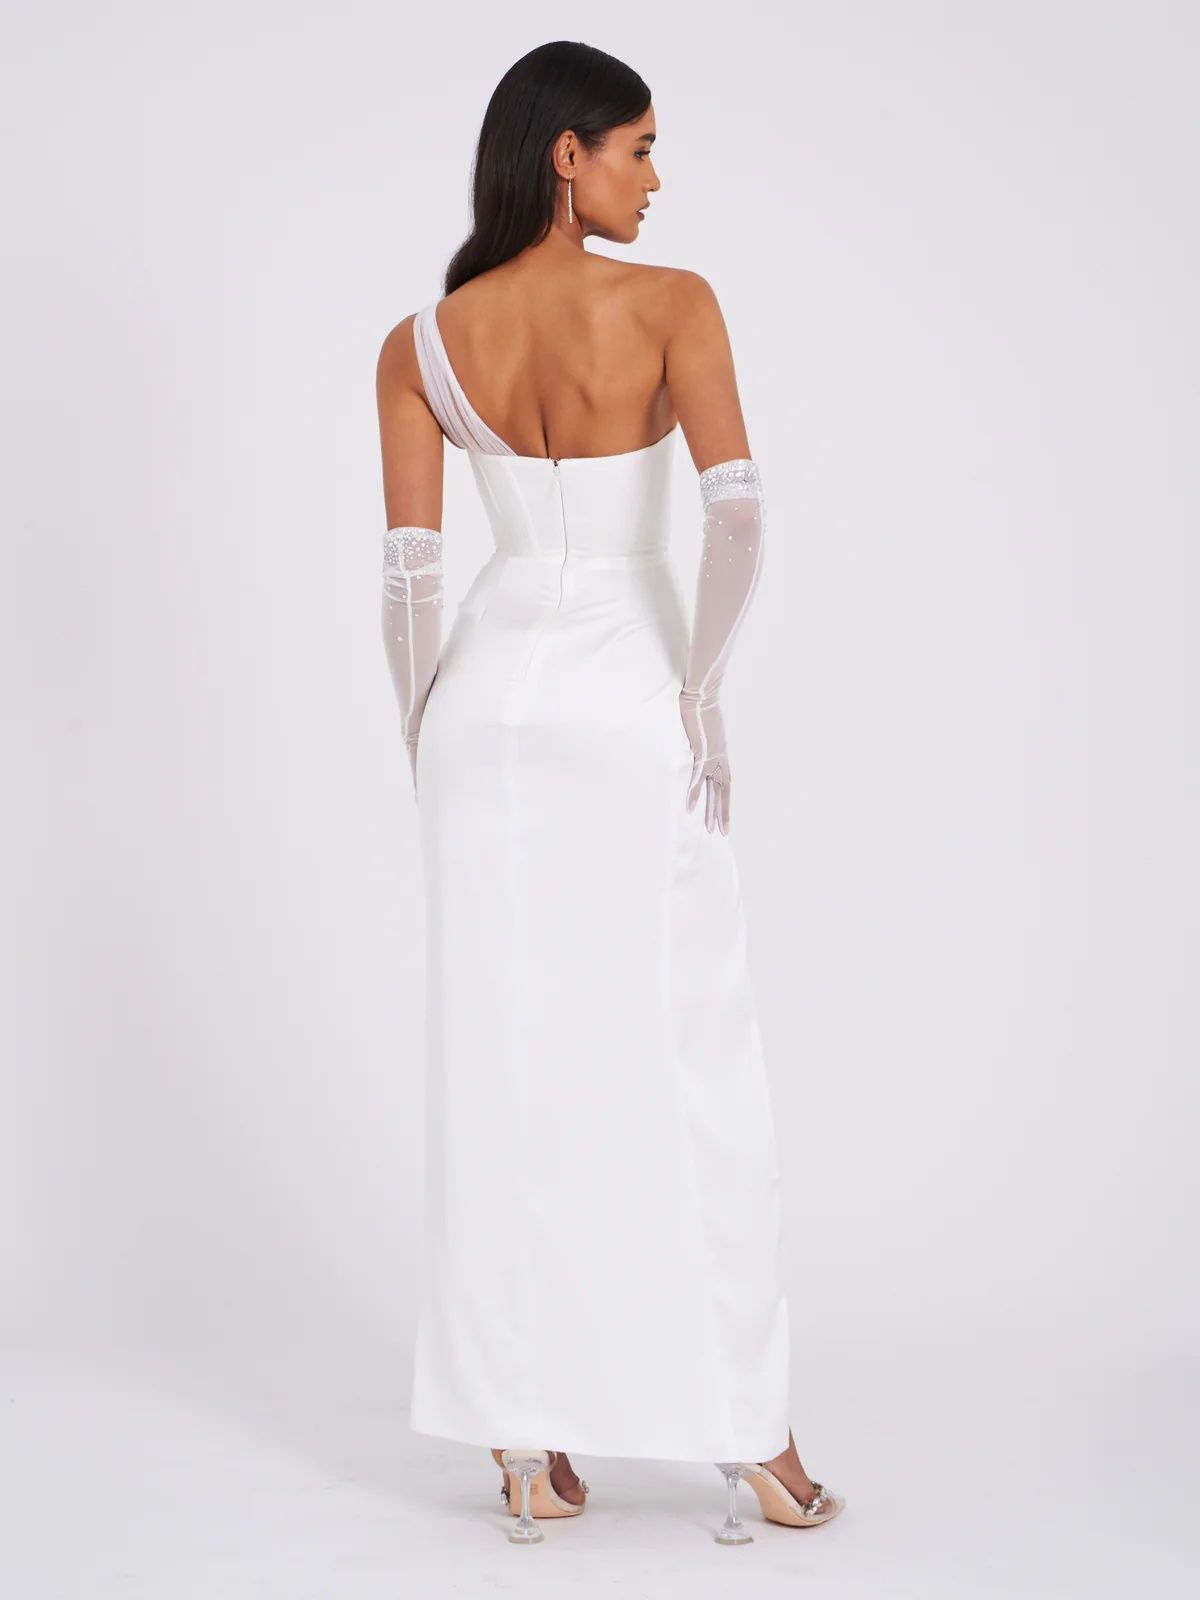 Style 2524MC33White MISS LOLA Size 12 Wedding One Shoulder Sequined White Side Slit Dress on Queenly